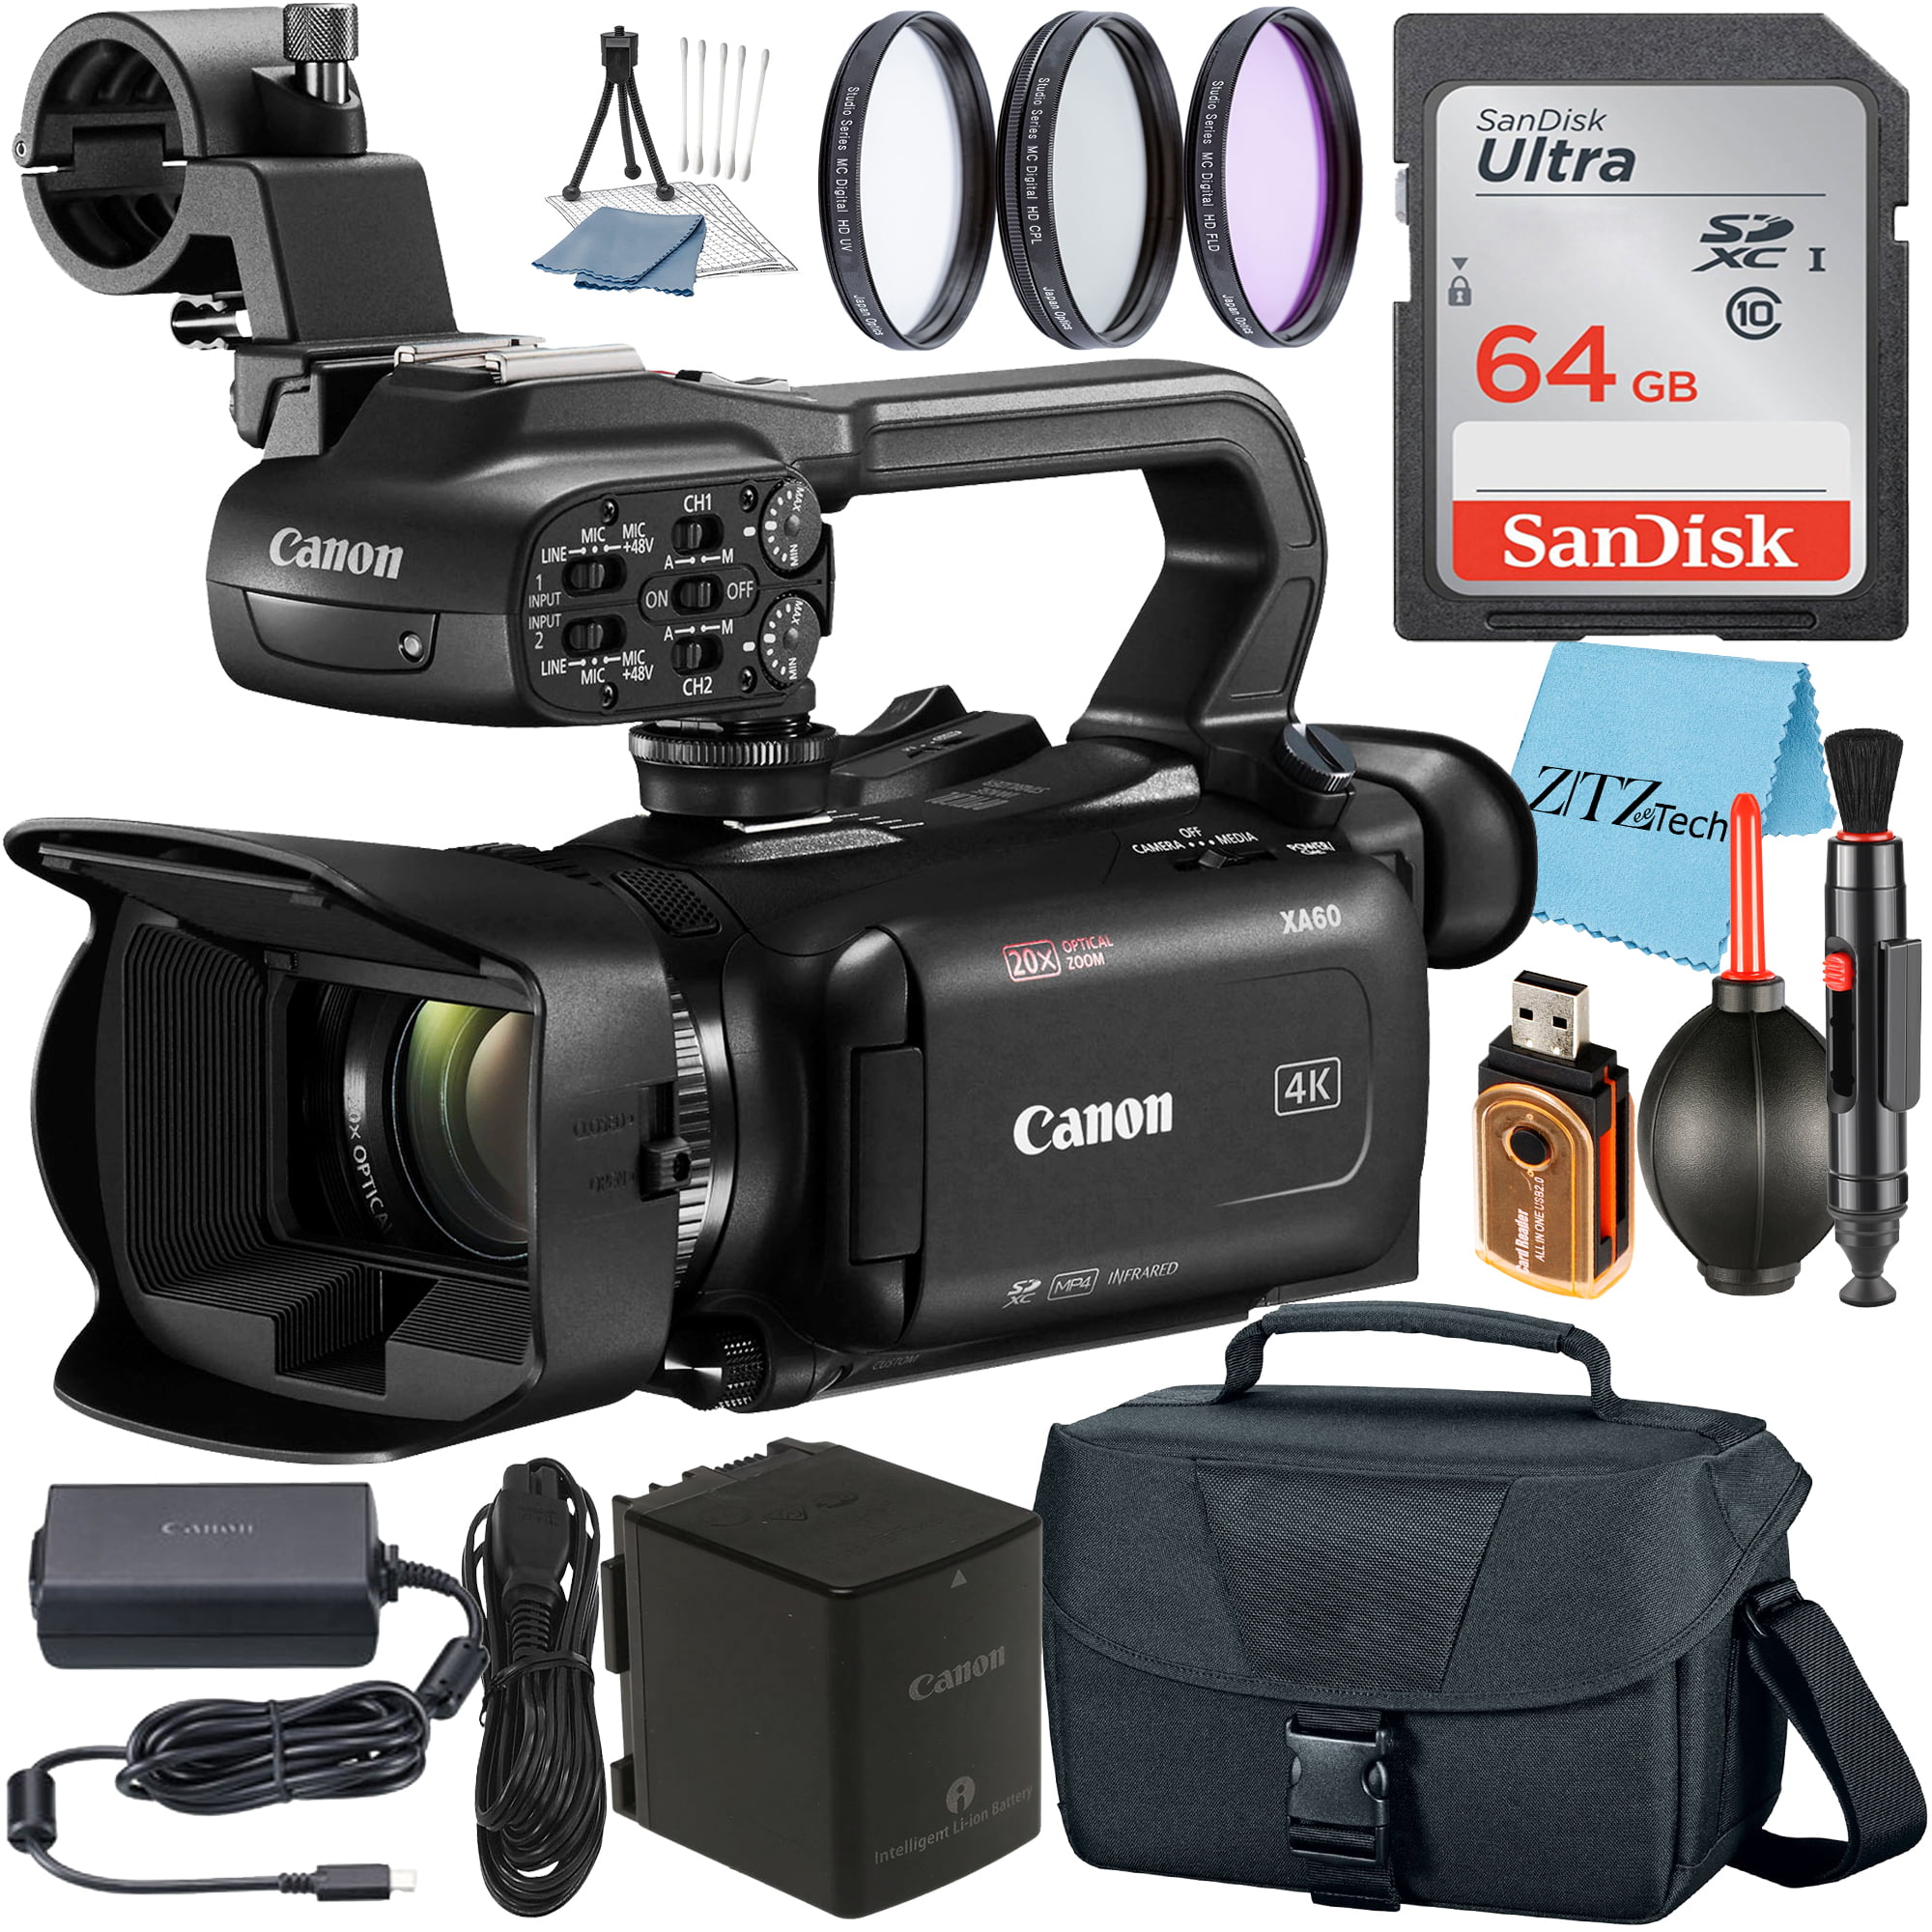 Canon XA60 Professional UHD 4K Camcorder with SanDisk 64GB Memory Card + Case + 3 Pieces Filter + ZeeTech Accessory Bundle